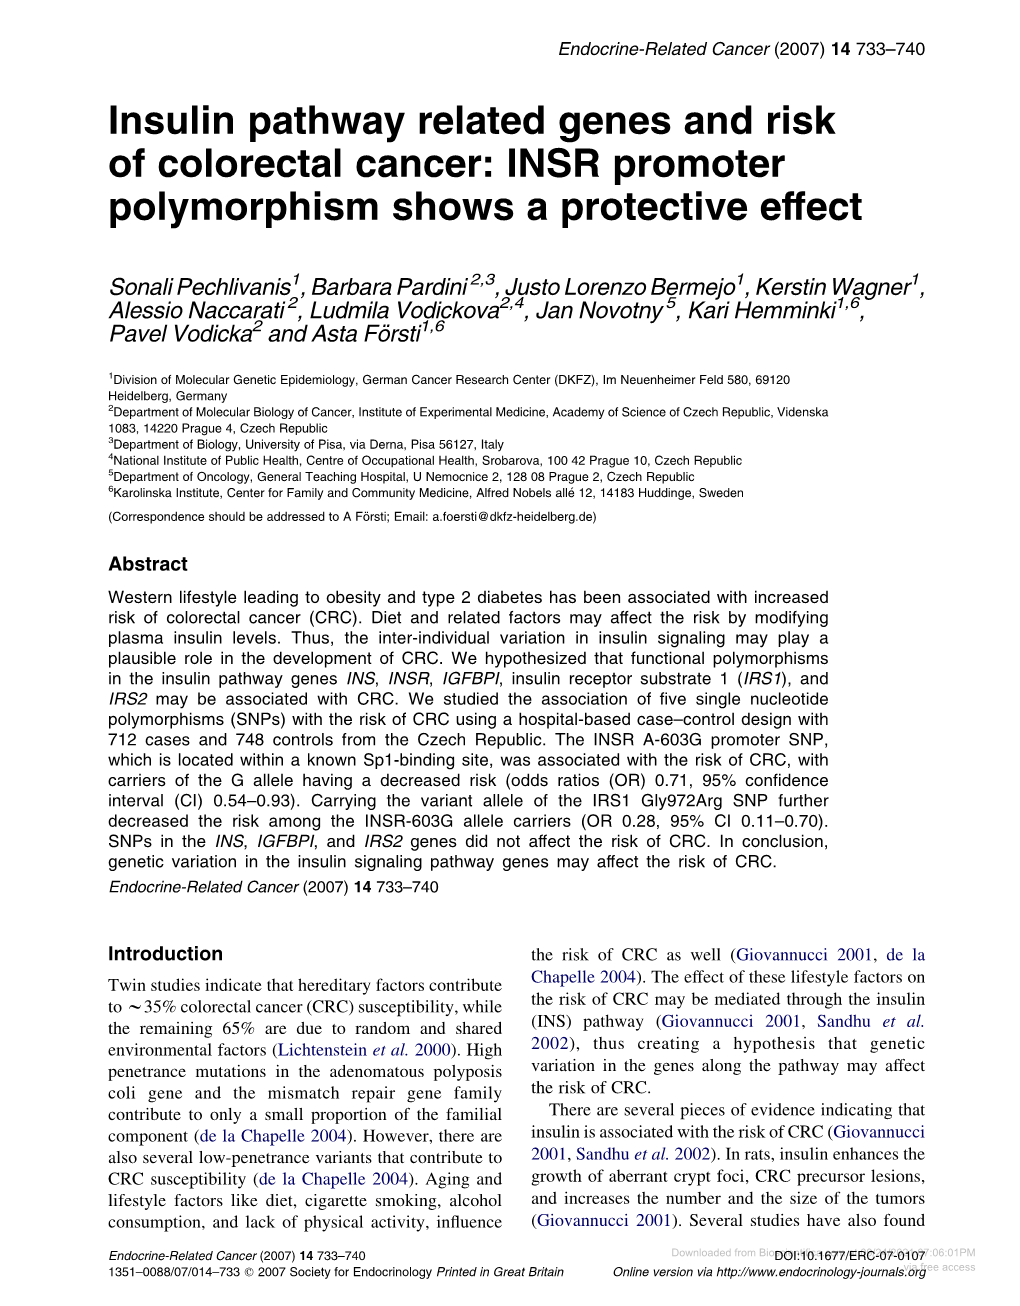 Insulin Pathway Related Genes and Risk of Colorectal Cancer: INSR Promoter Polymorphism Shows a Protective Effect